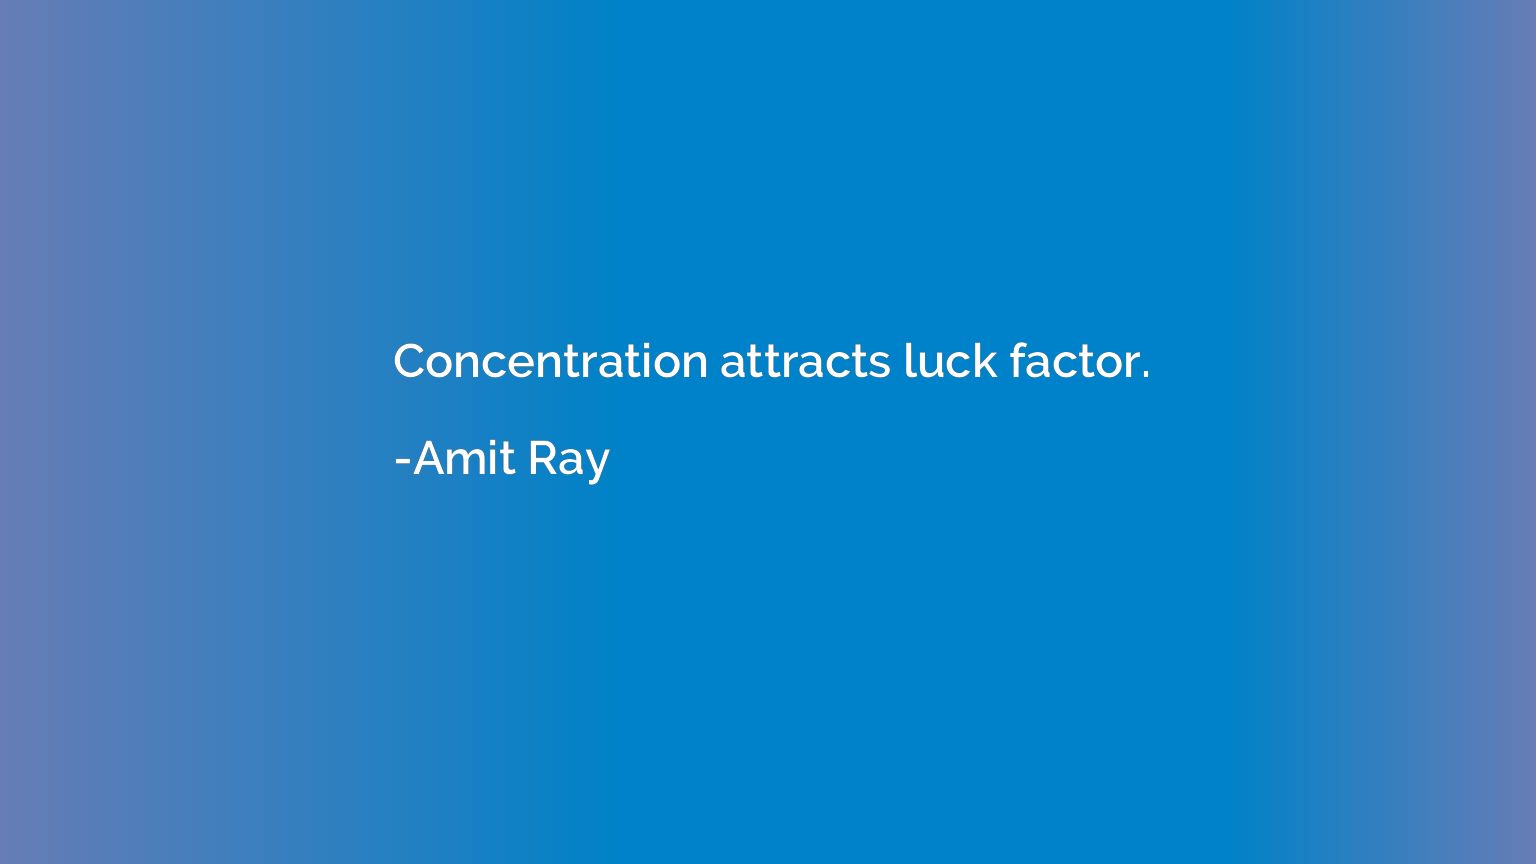 Concentration attracts luck factor.